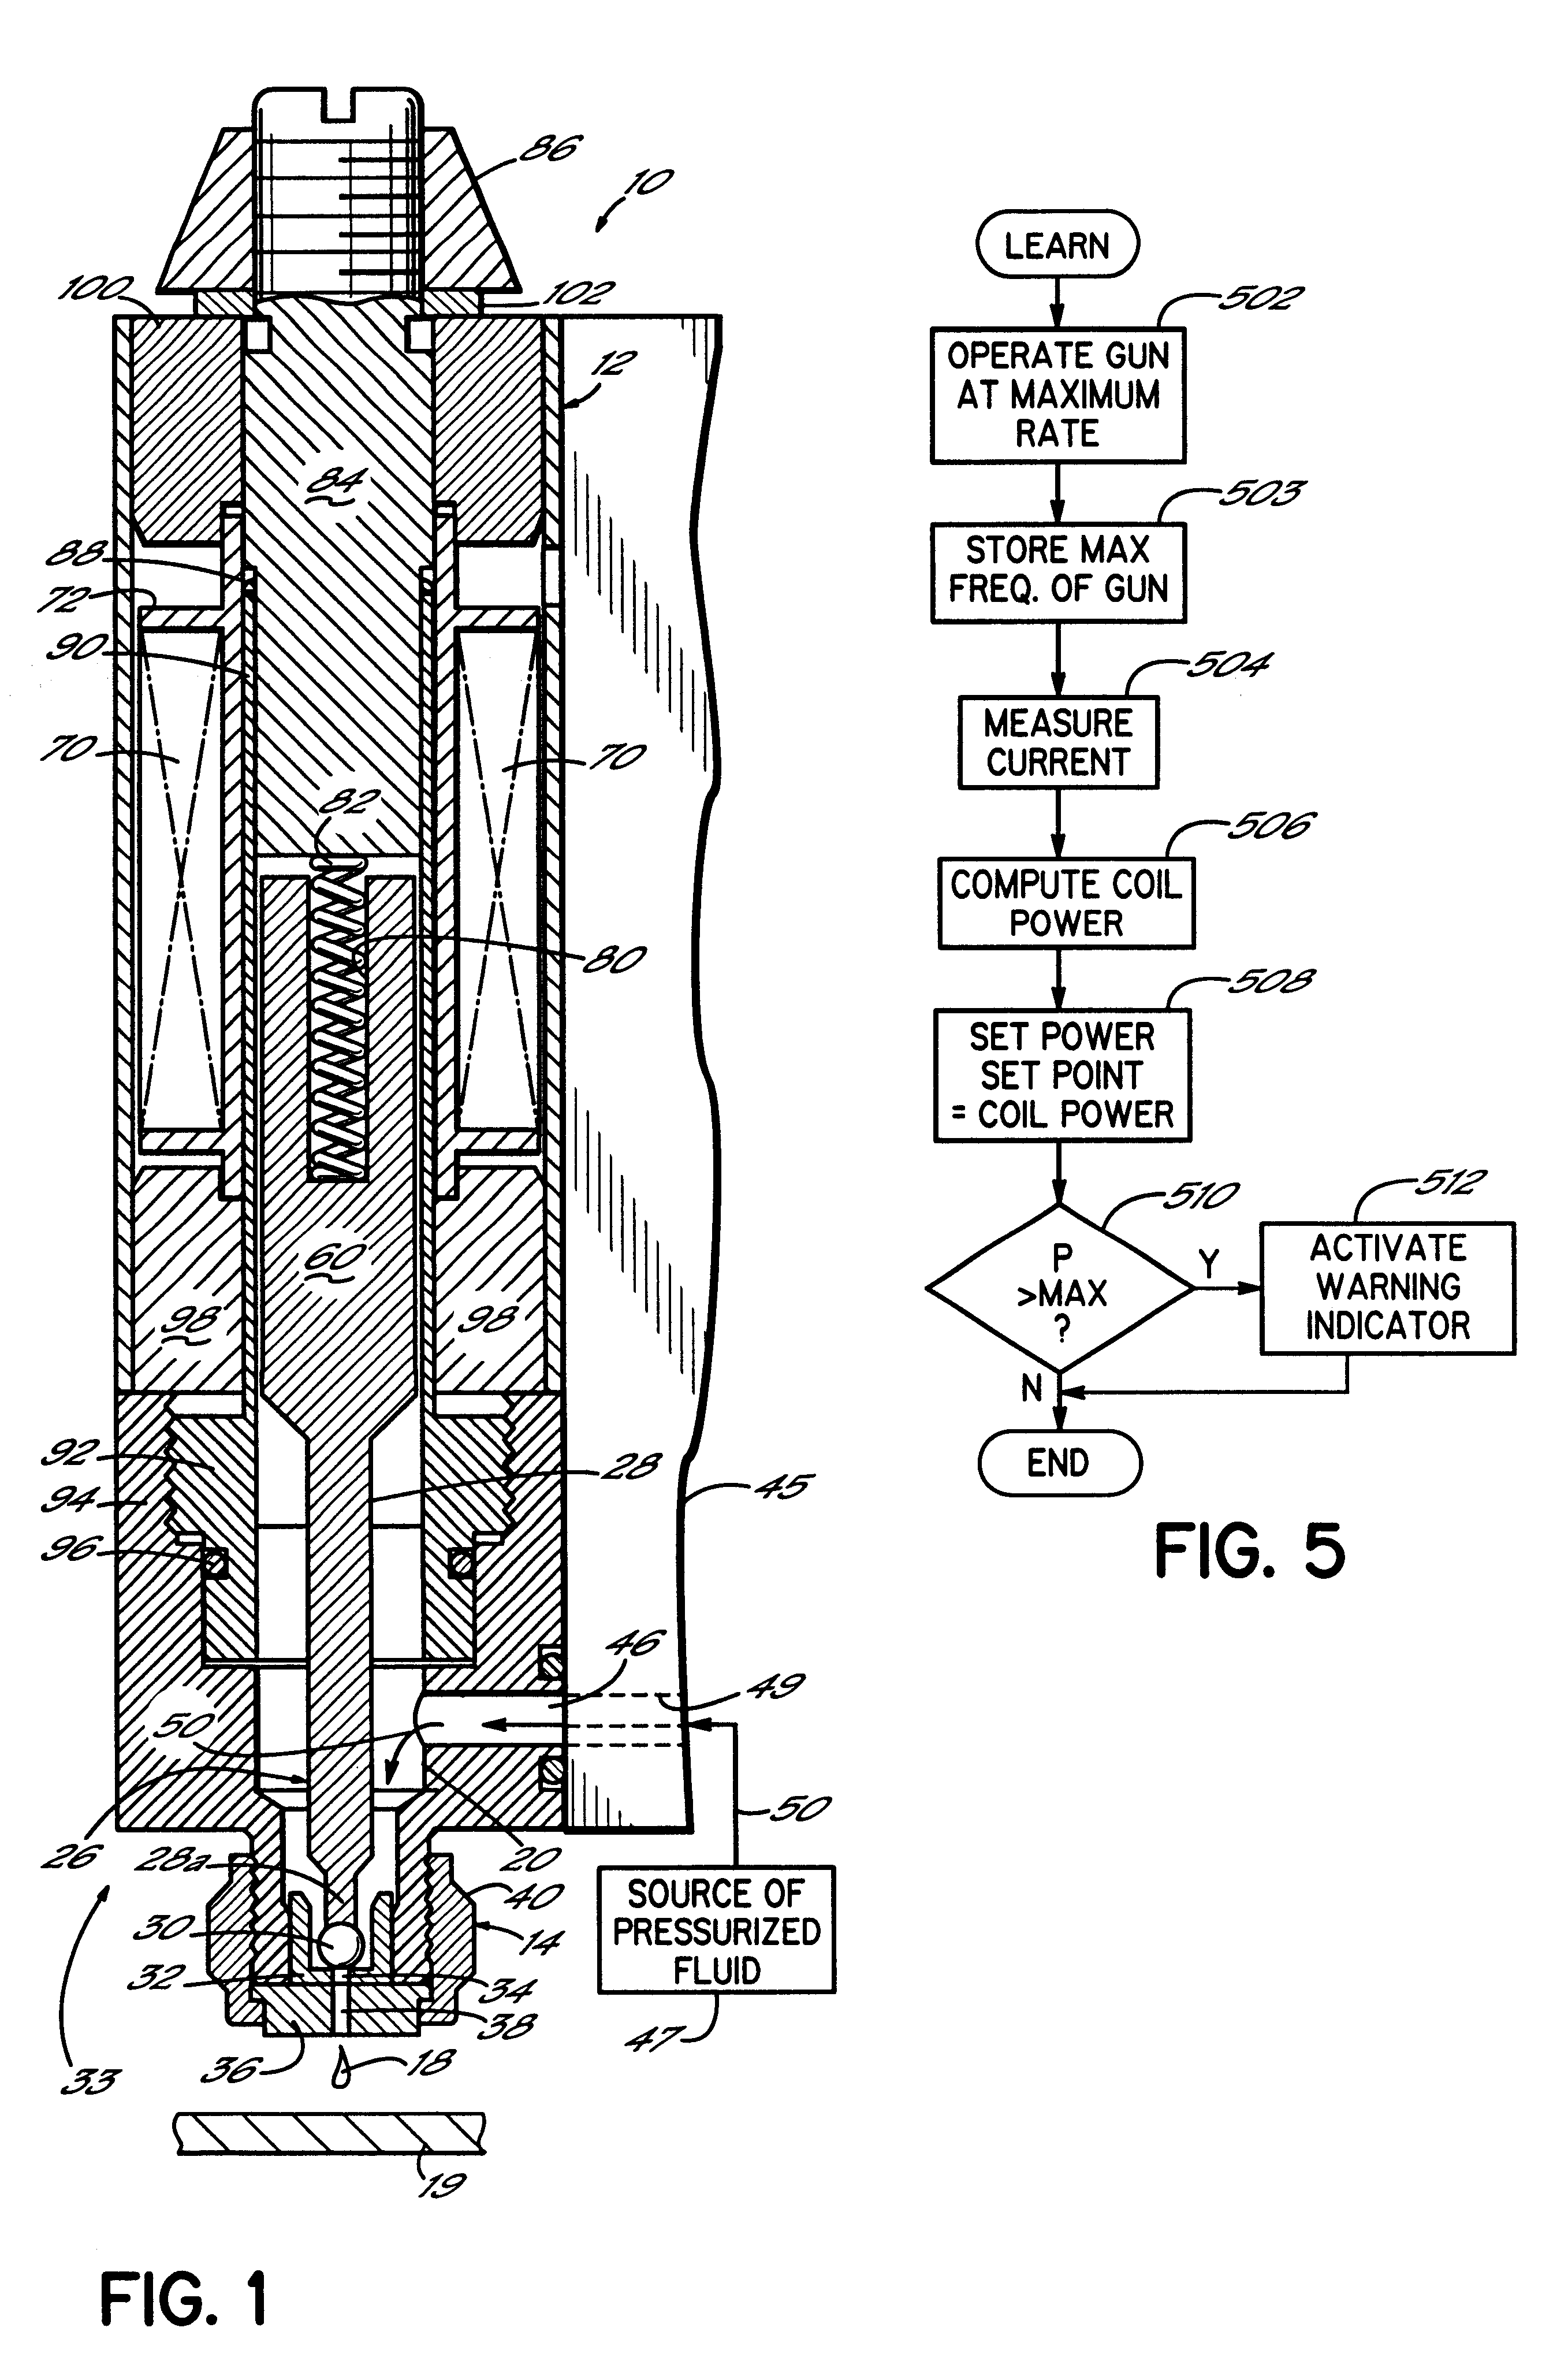 Electrically operated viscous fluid dispensing apparatus and method